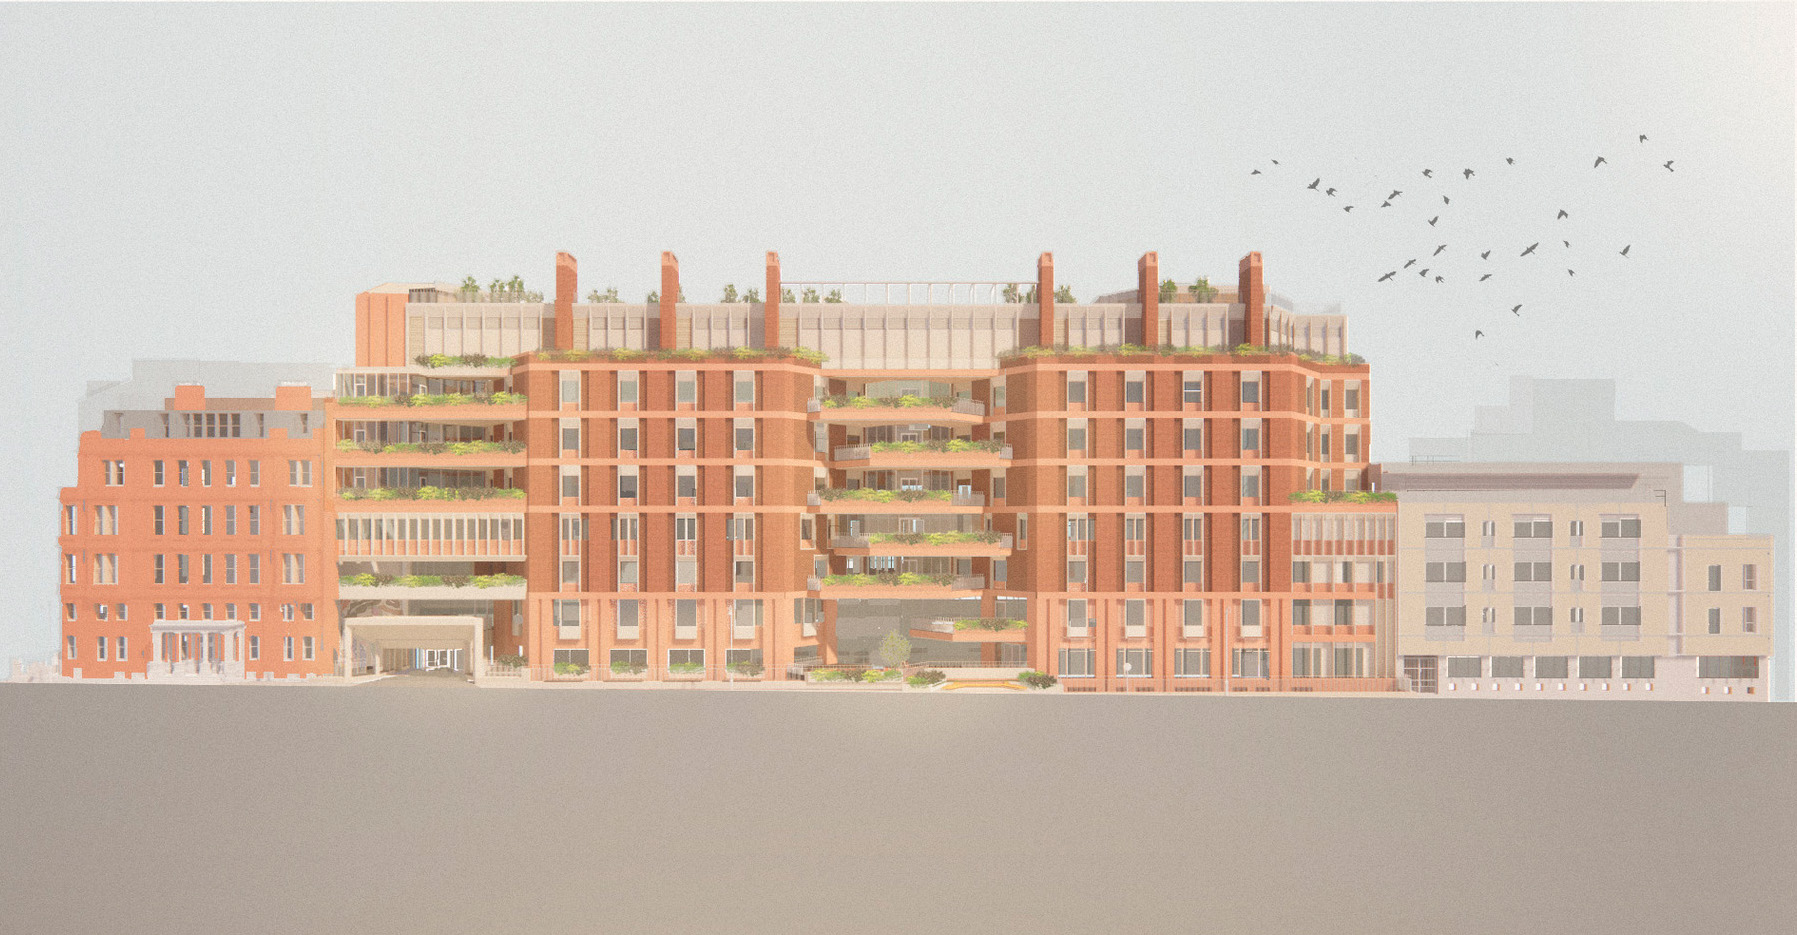 An architectural triptych of ‘Houses’, including the existing red brick Paul O’Gorman Building, framed with shared vertical gardens.